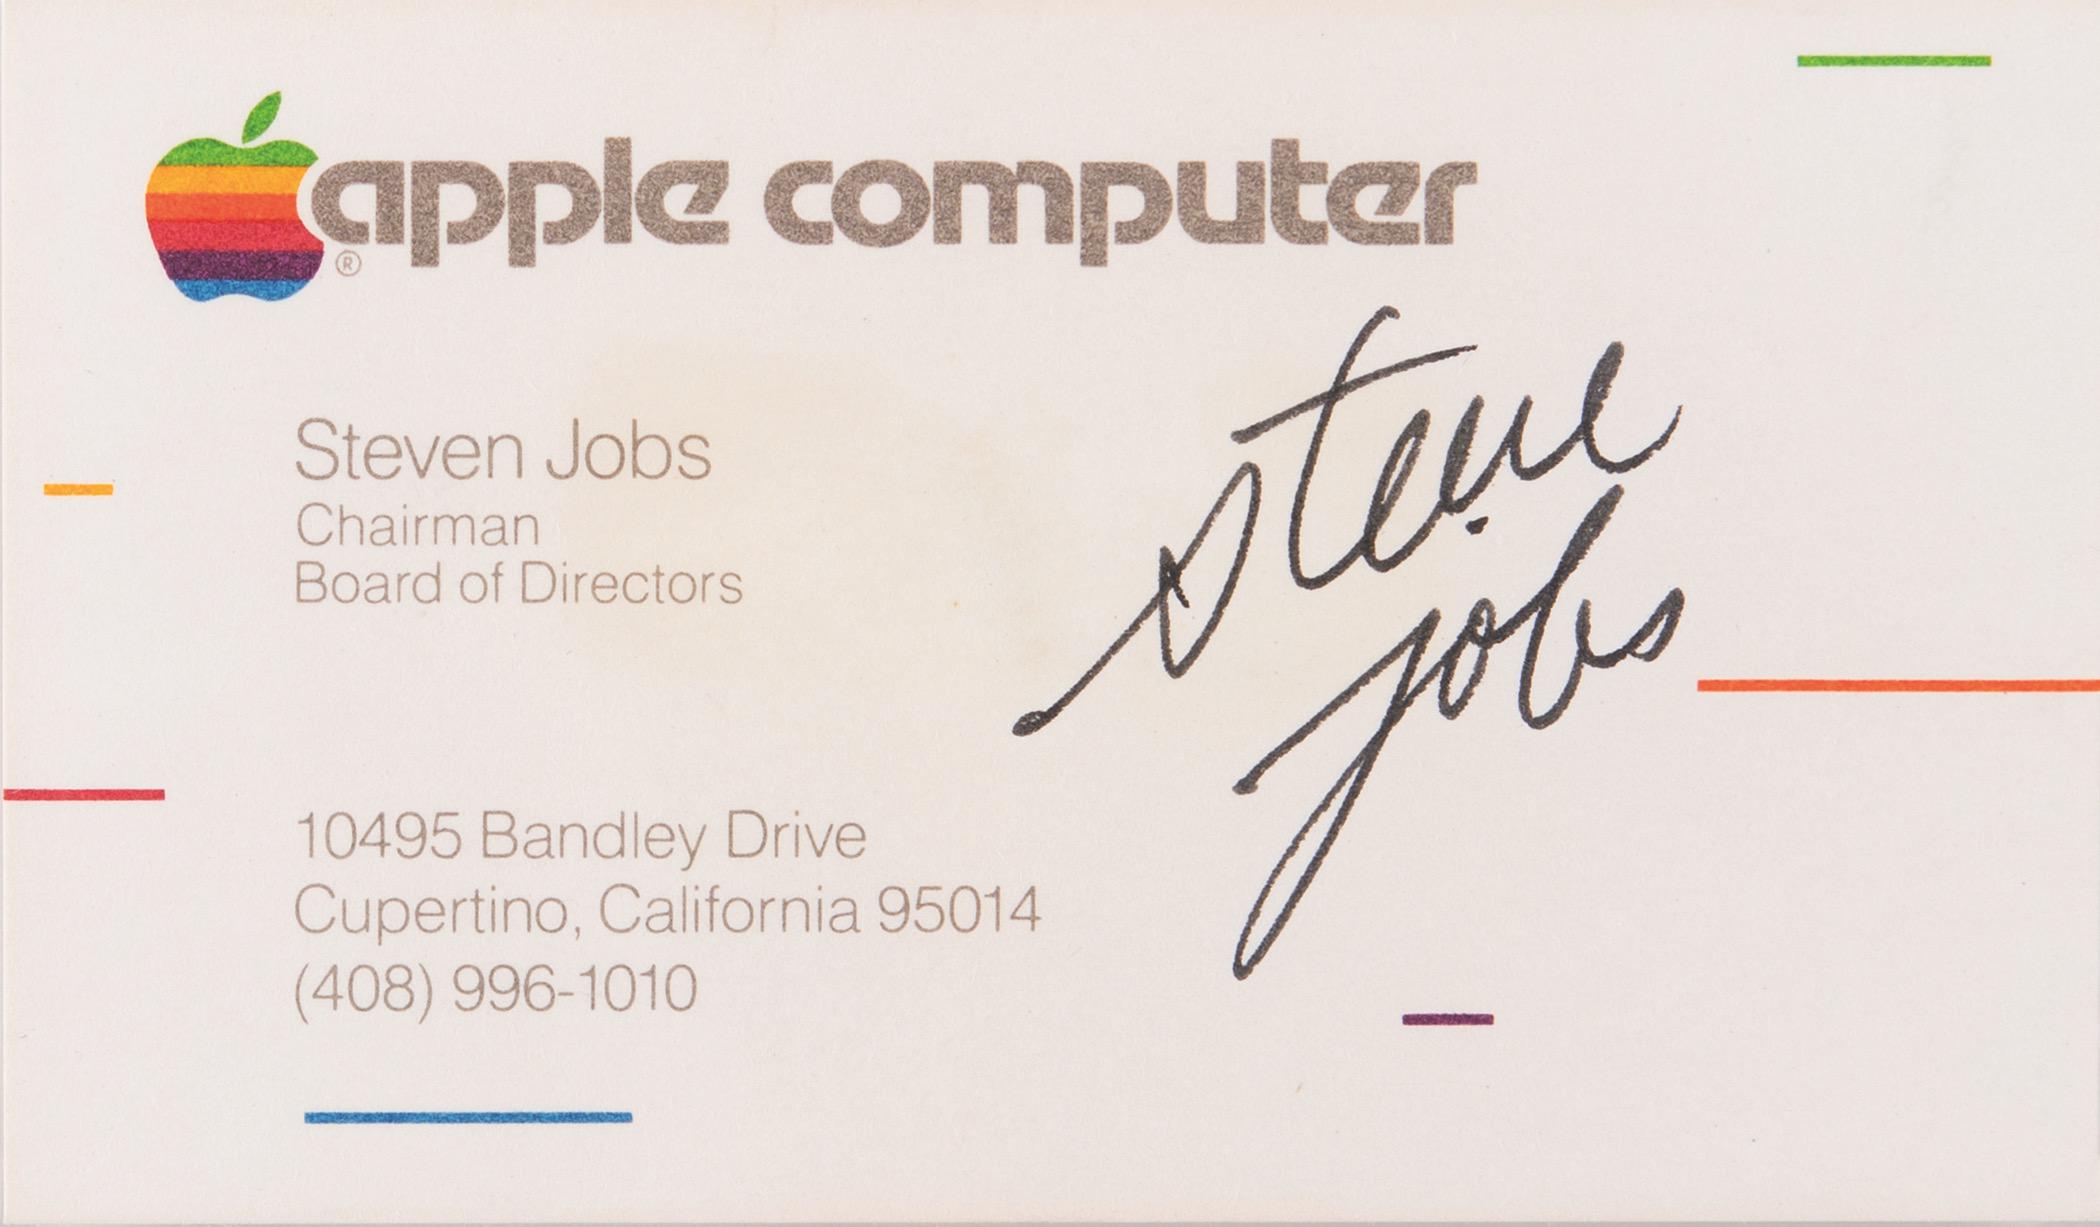 Steve Jobs and Apple, the business card is worth a fortune